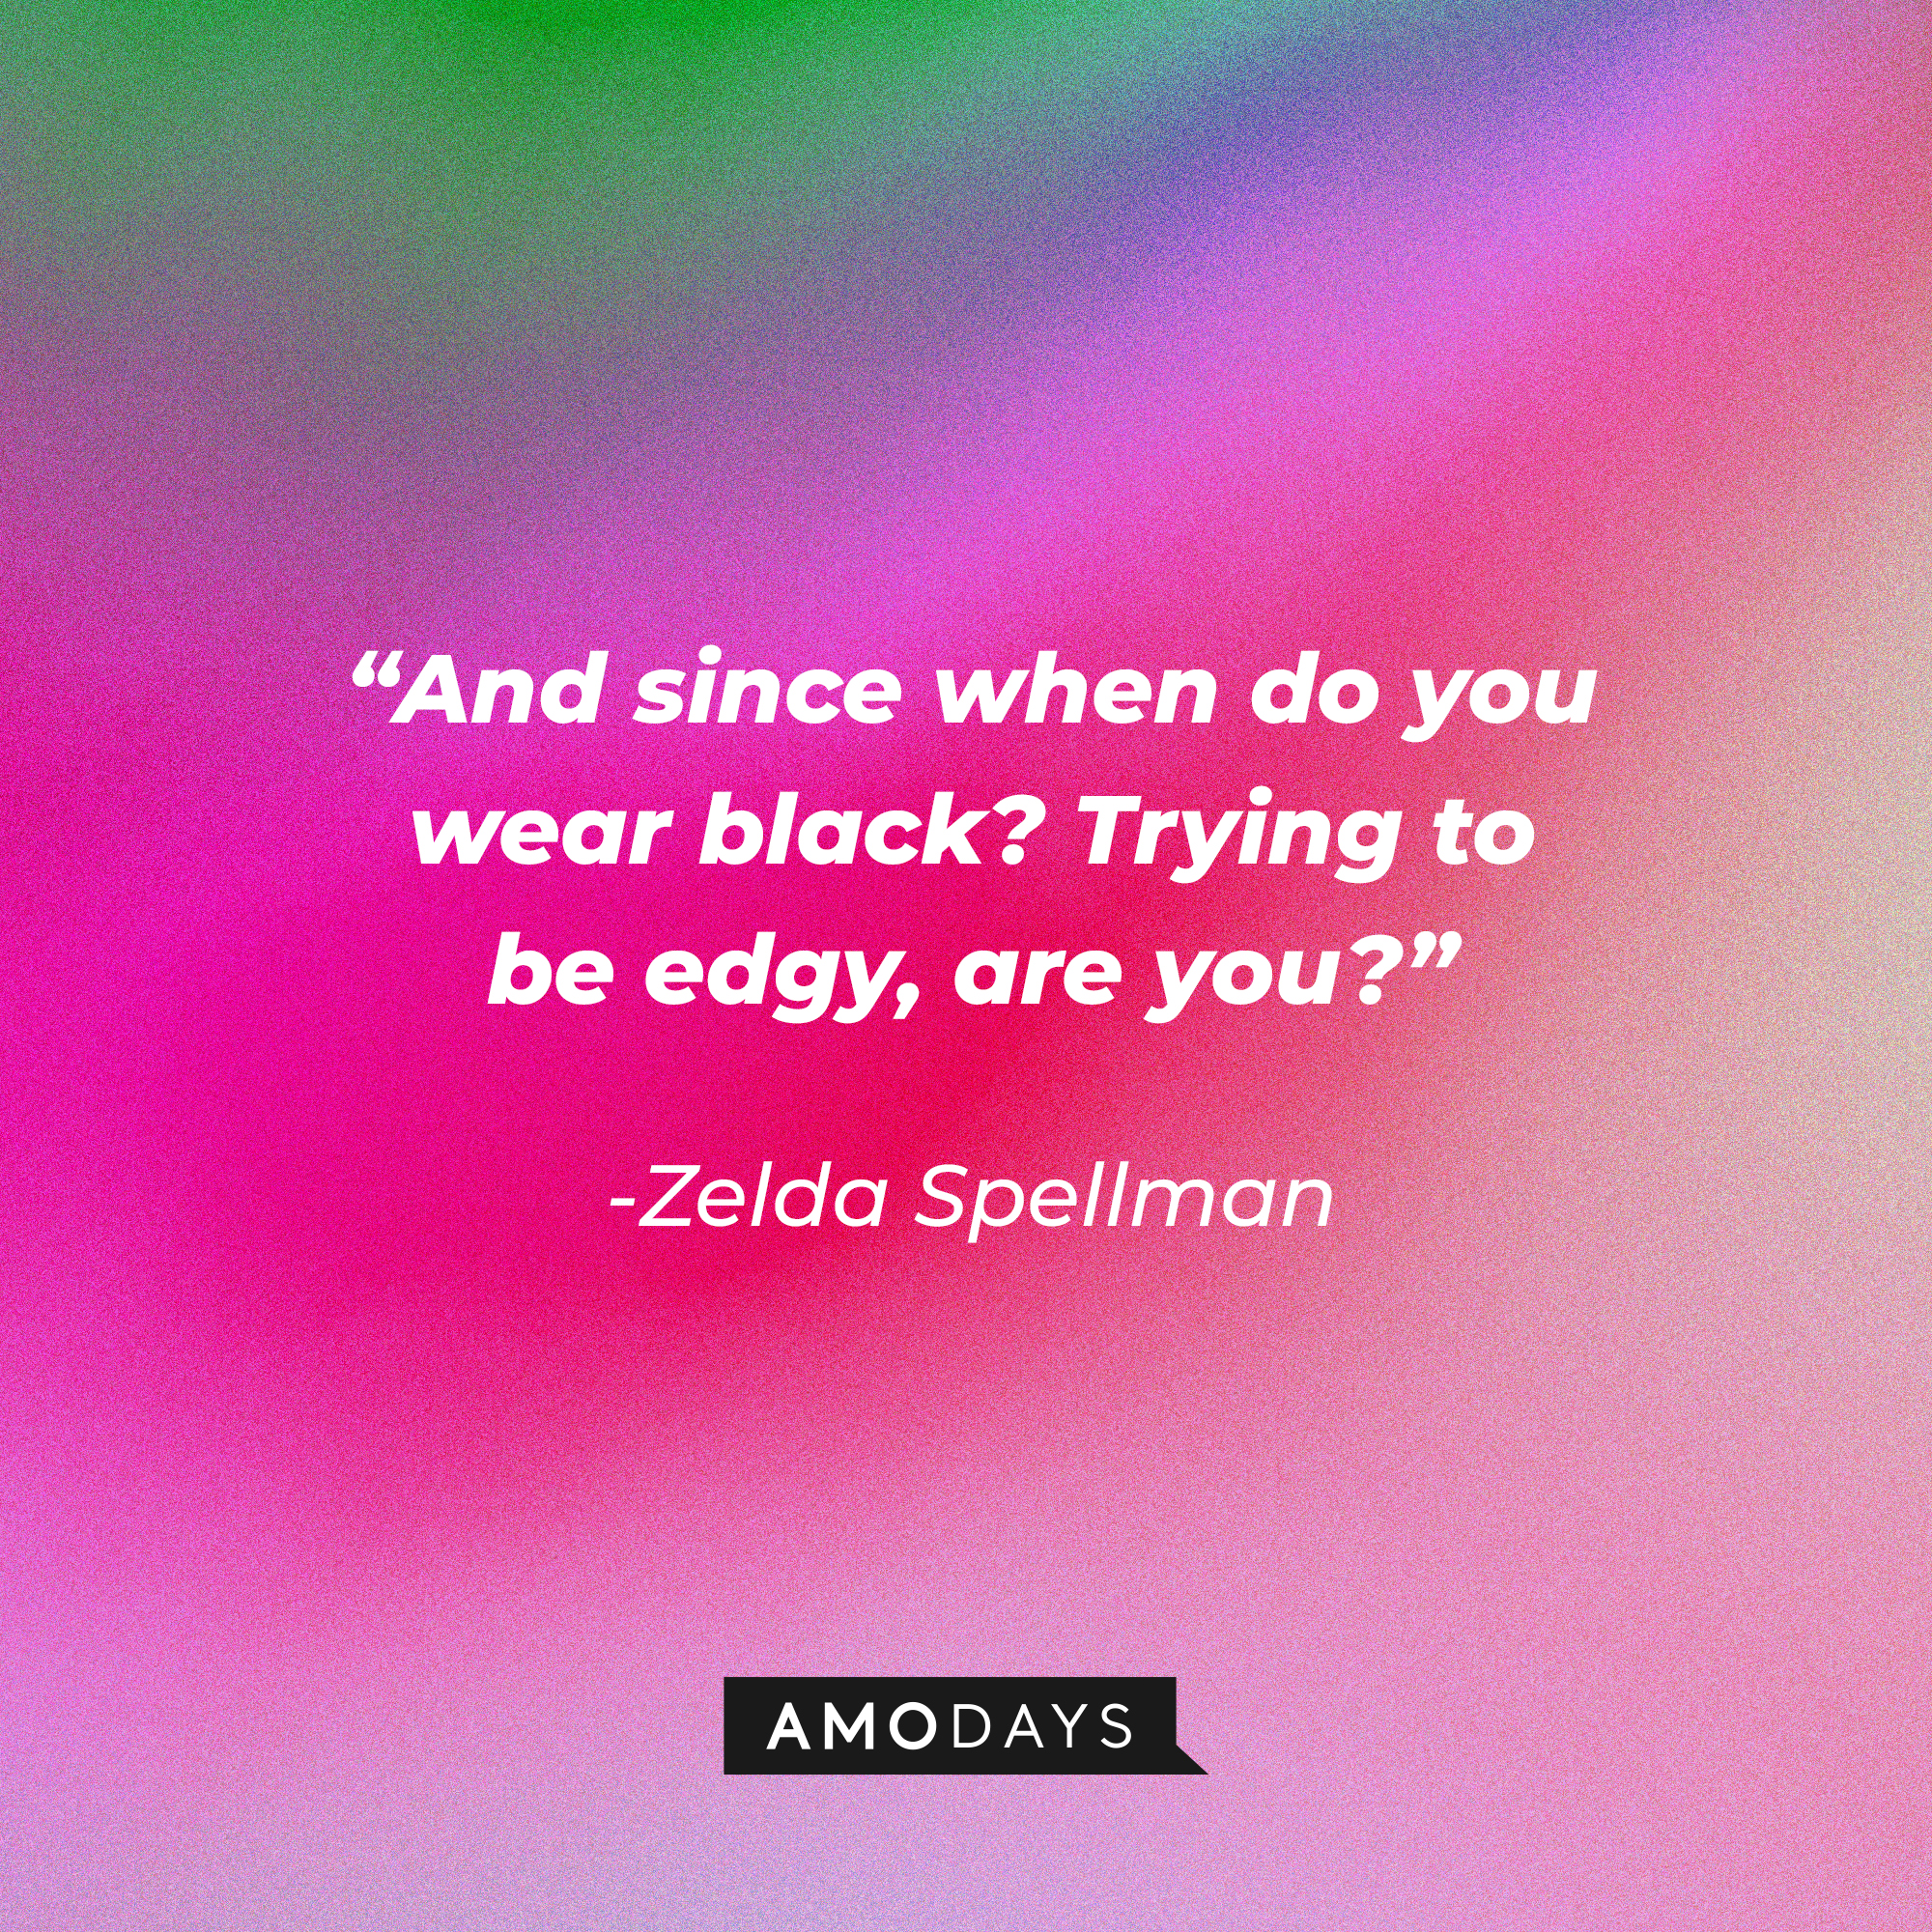 Zelda Spellman's quote: “And since when do you wear black? Trying to be edgy, are you?” | Source: Amodays